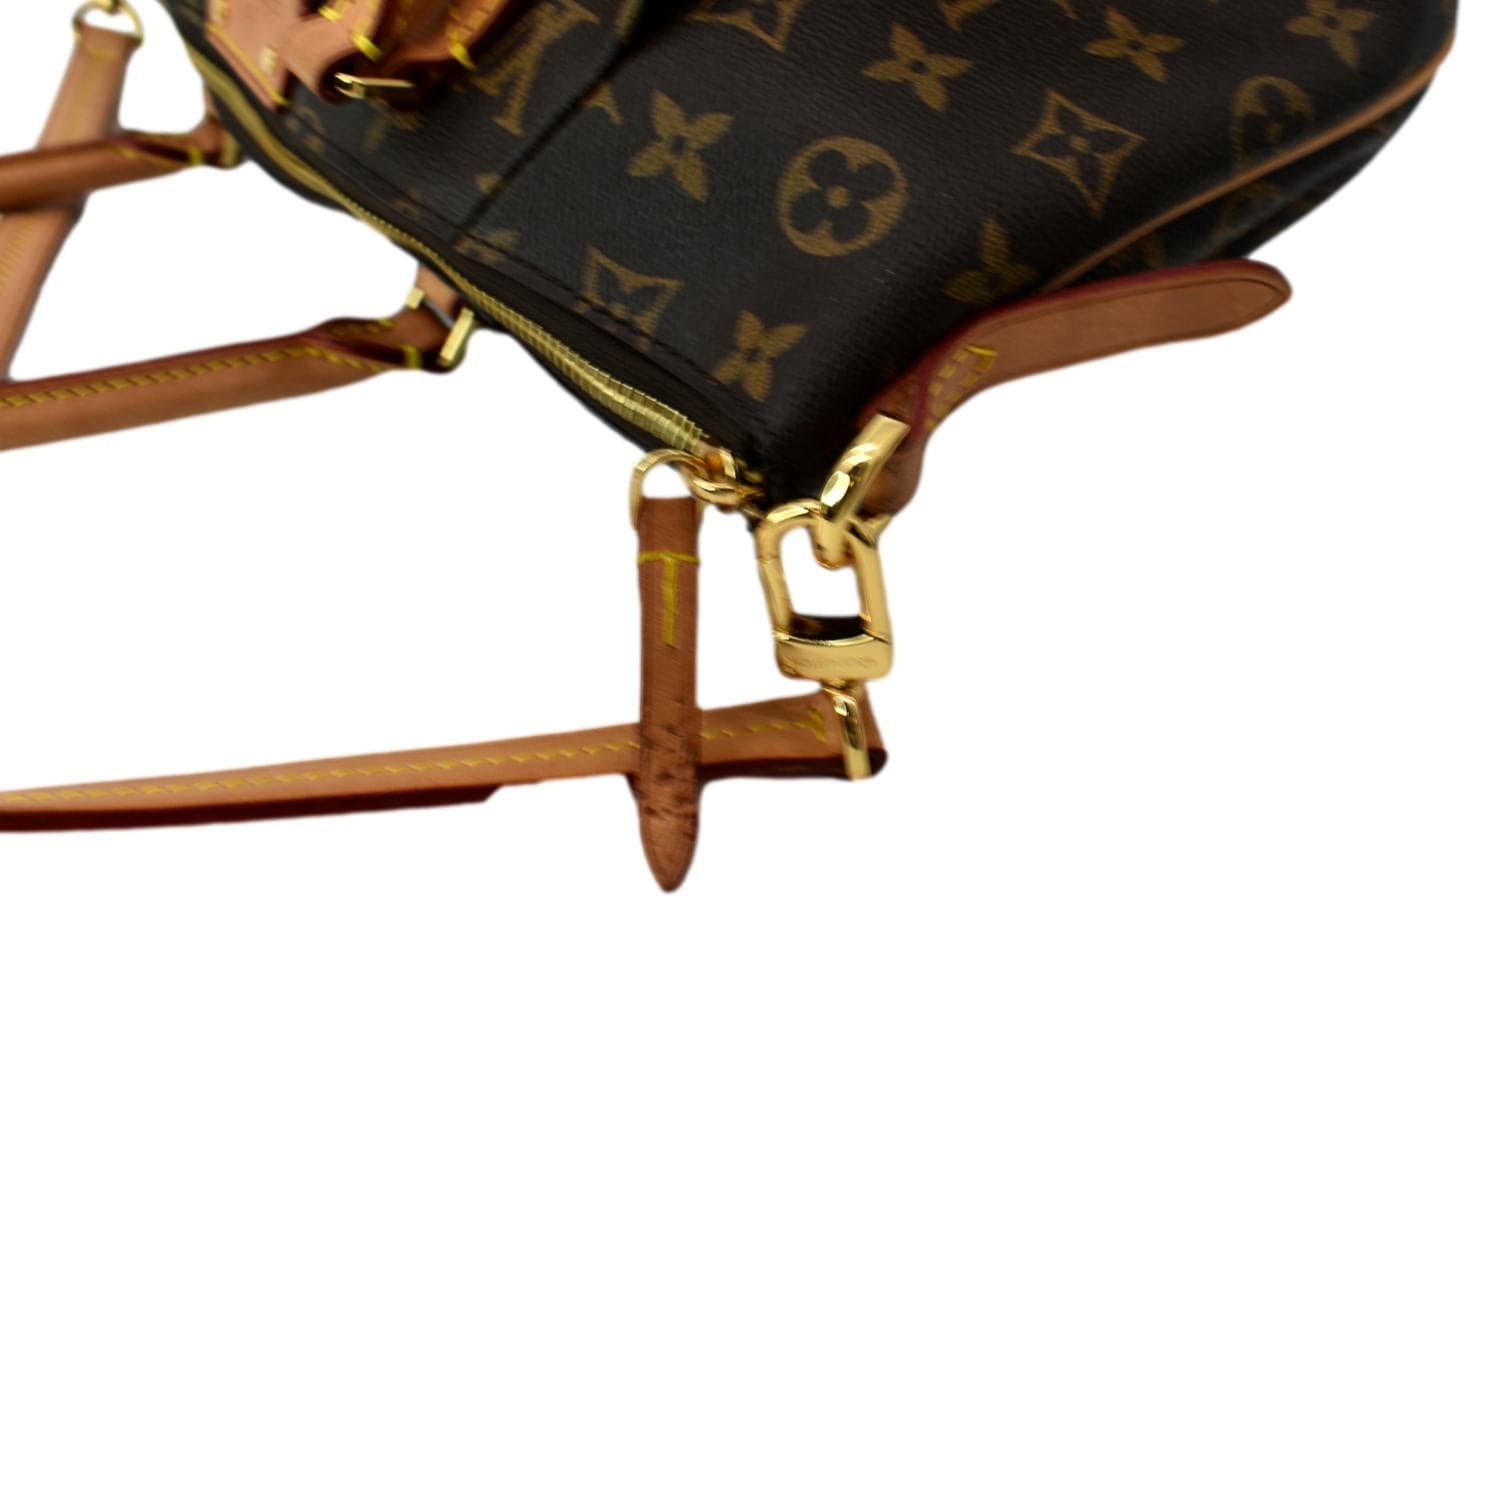 Louis Vuitton 2017 pre-owned Turenne PM tote bag